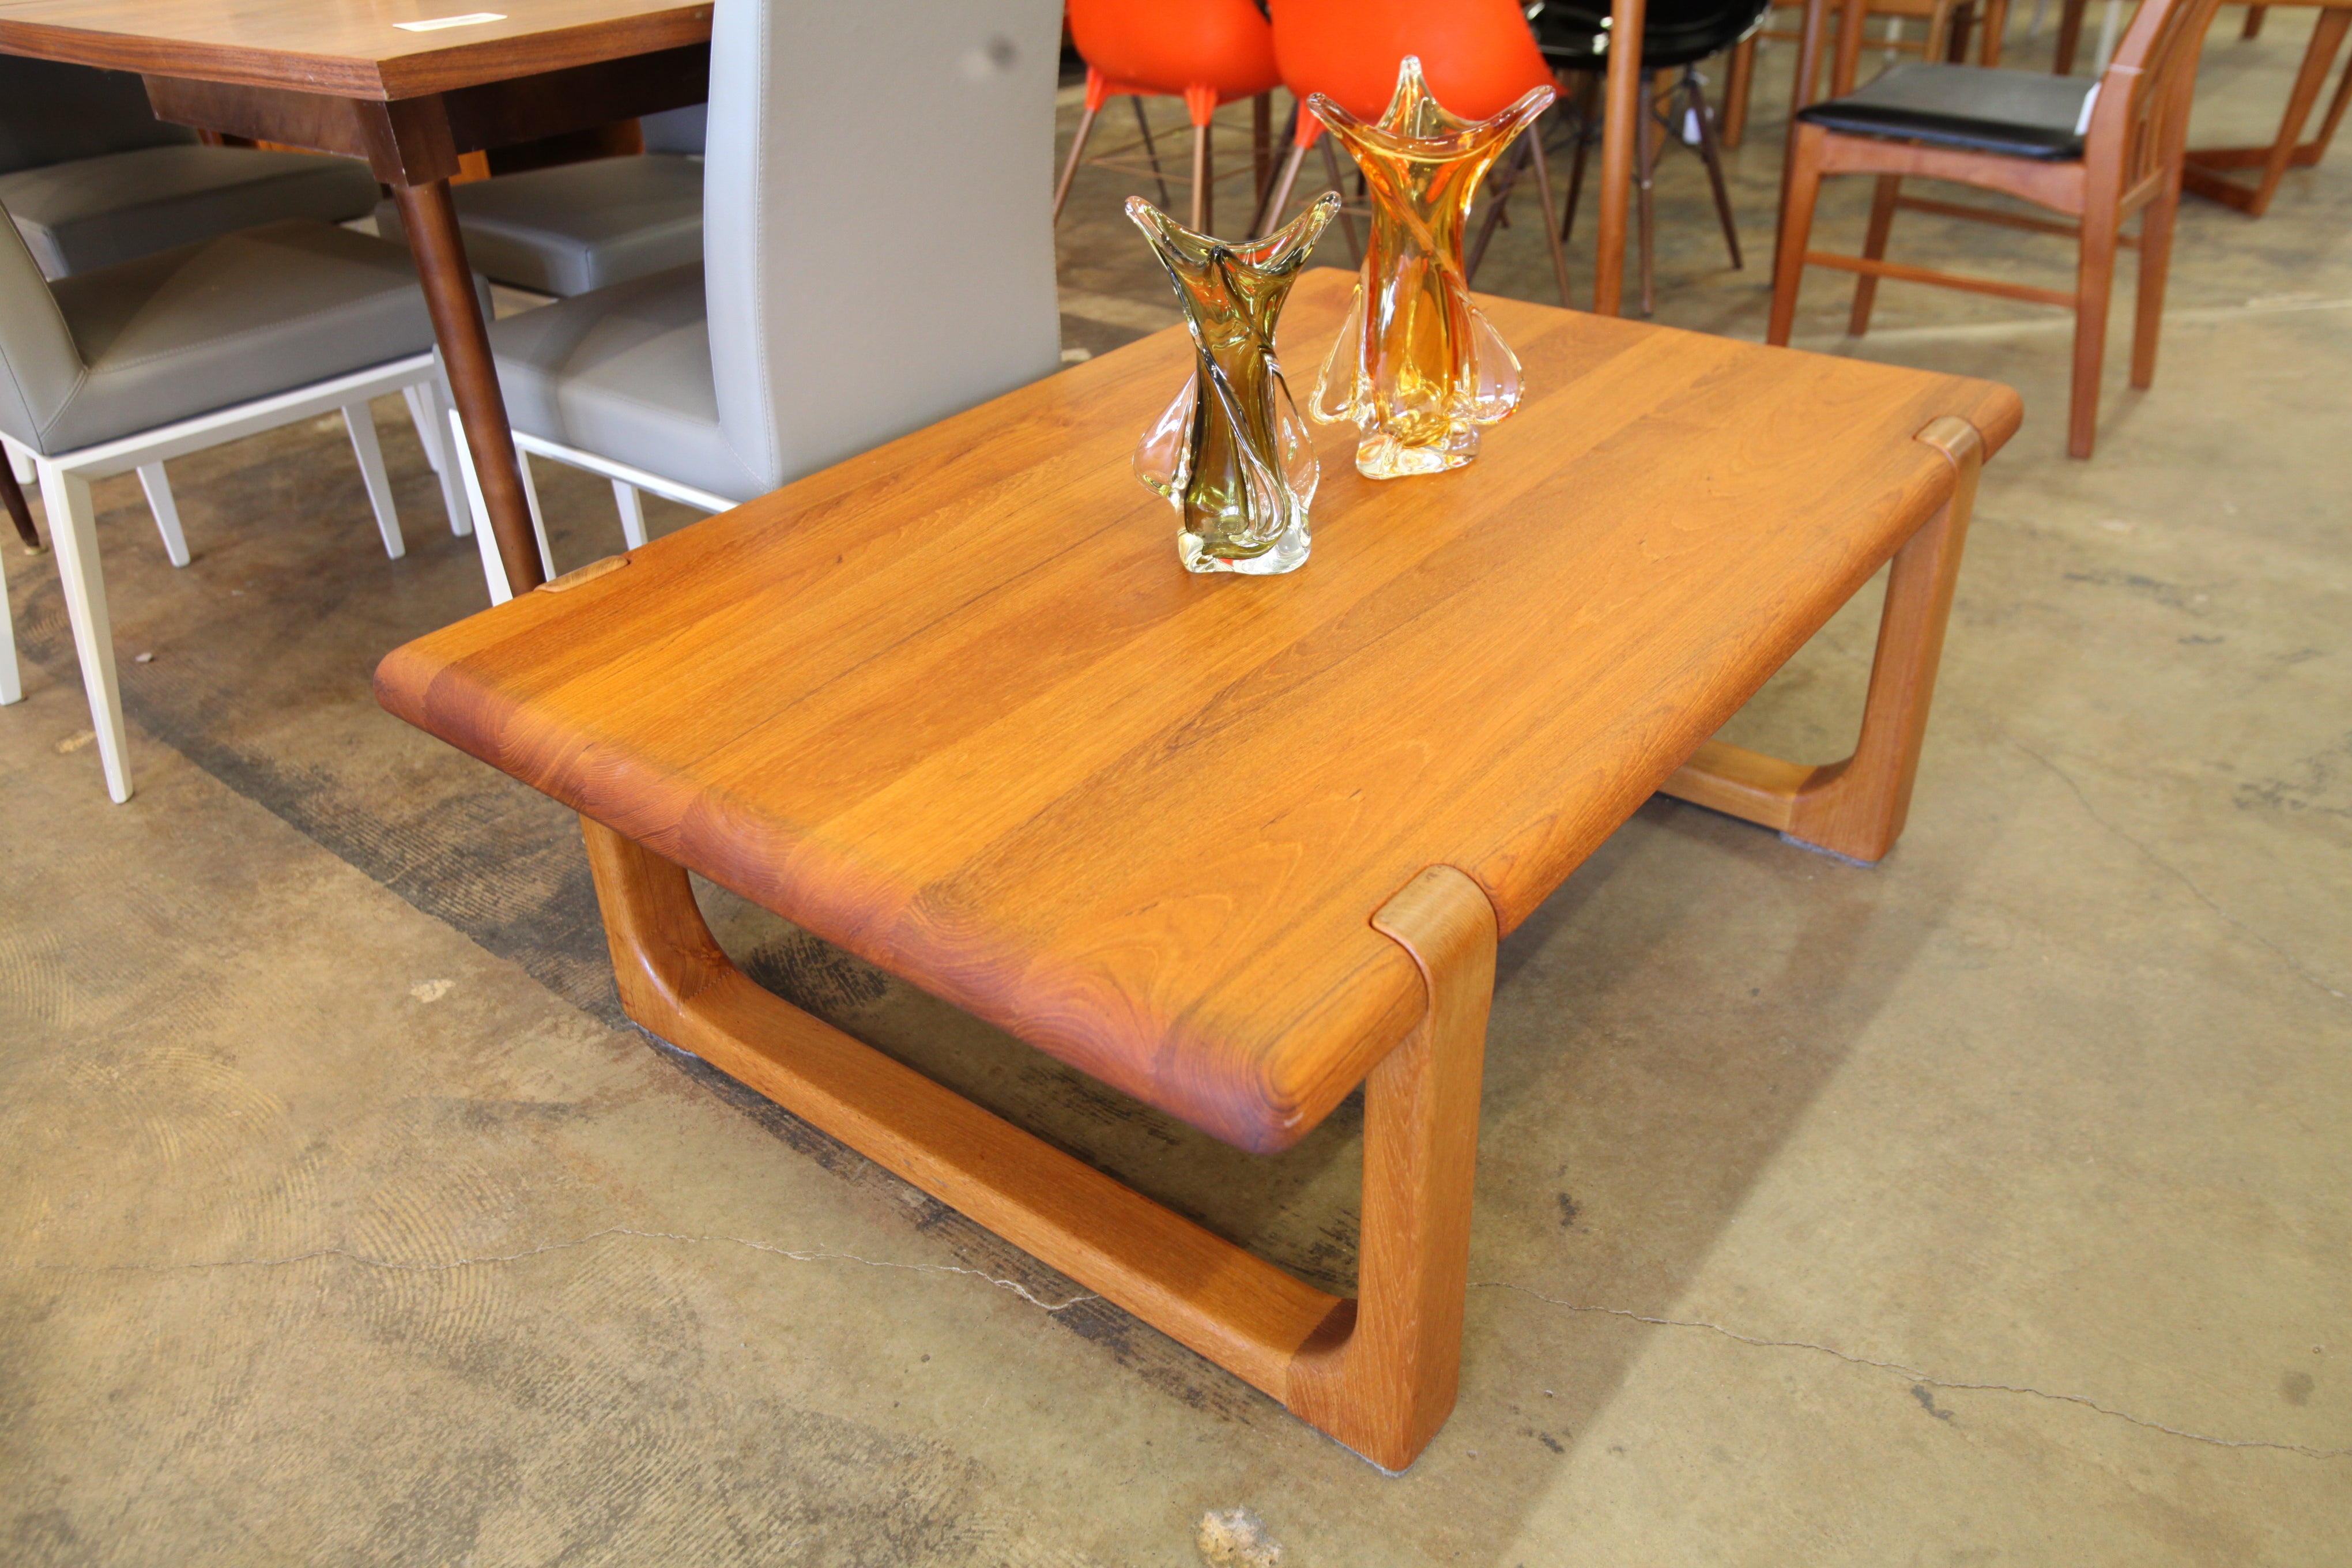 Vintage "SOLID TEAK" Coffee Table by Niels Bach (47.25" x 31.25" x 16.5"H)